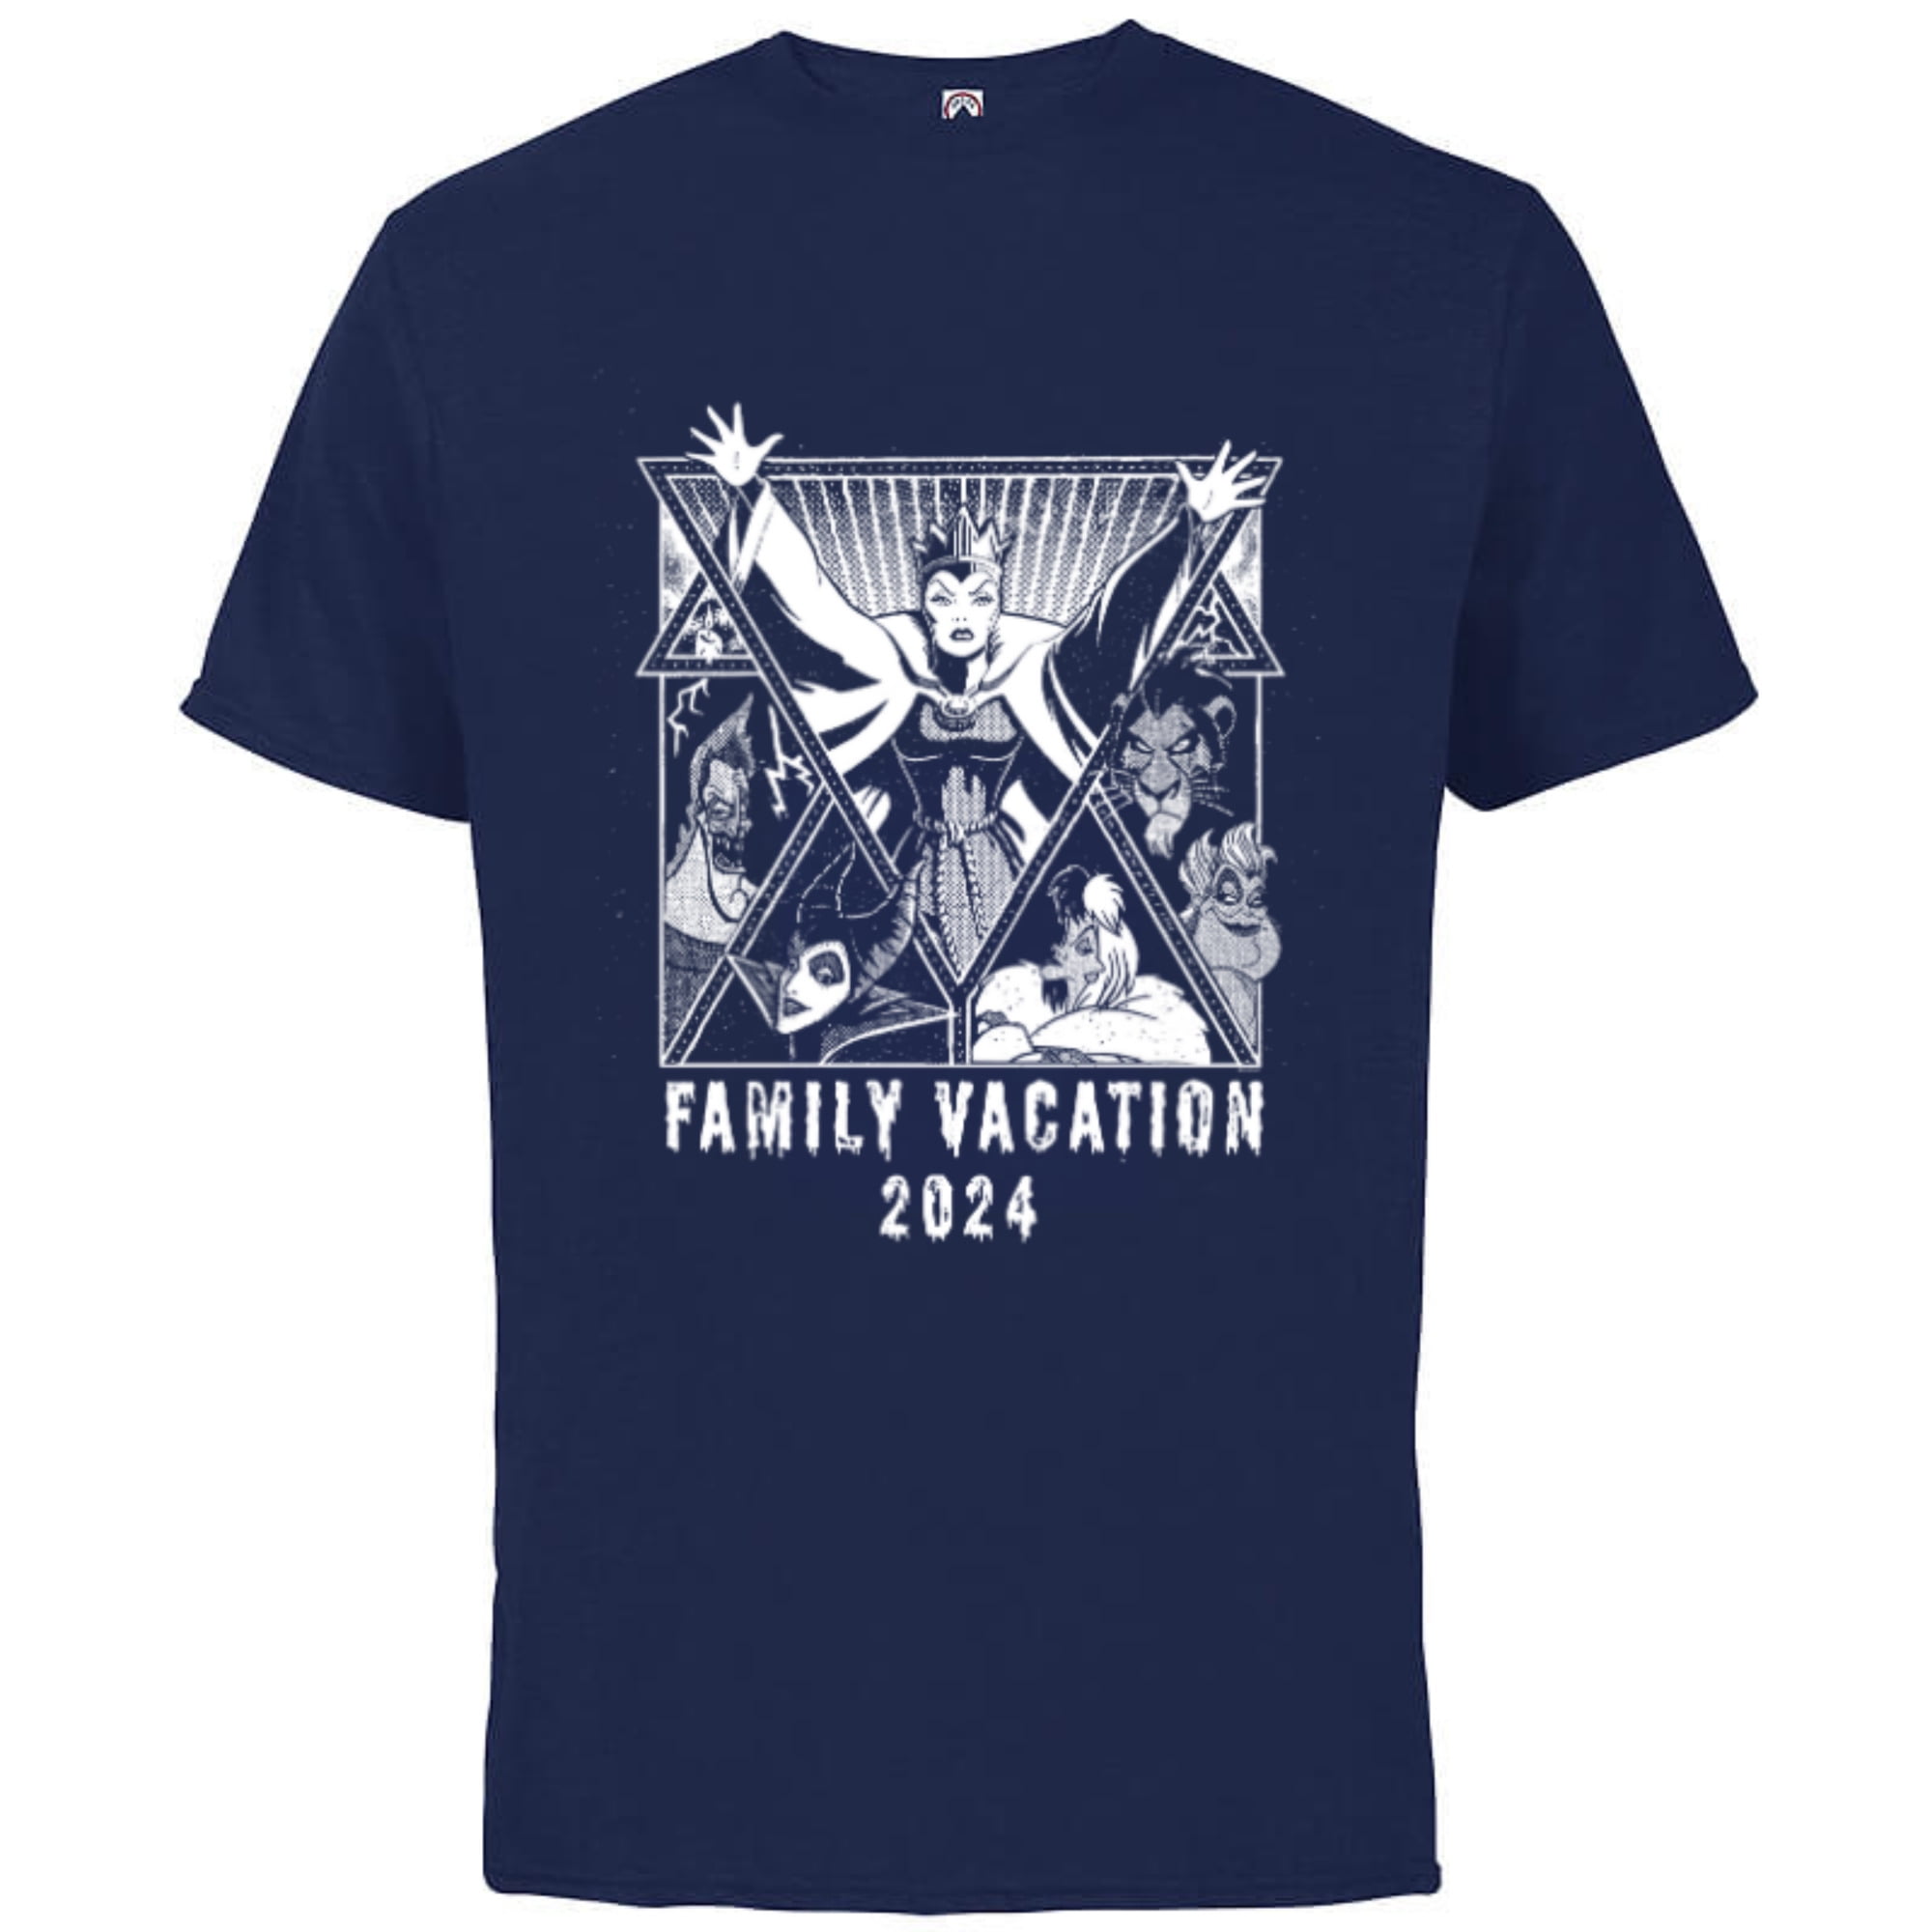 Customized-Athletic Graphic T-Shirt Sleeve - Villains Disney Vacation Adults for Short - Print Trip Cotton 2024 Family Navy